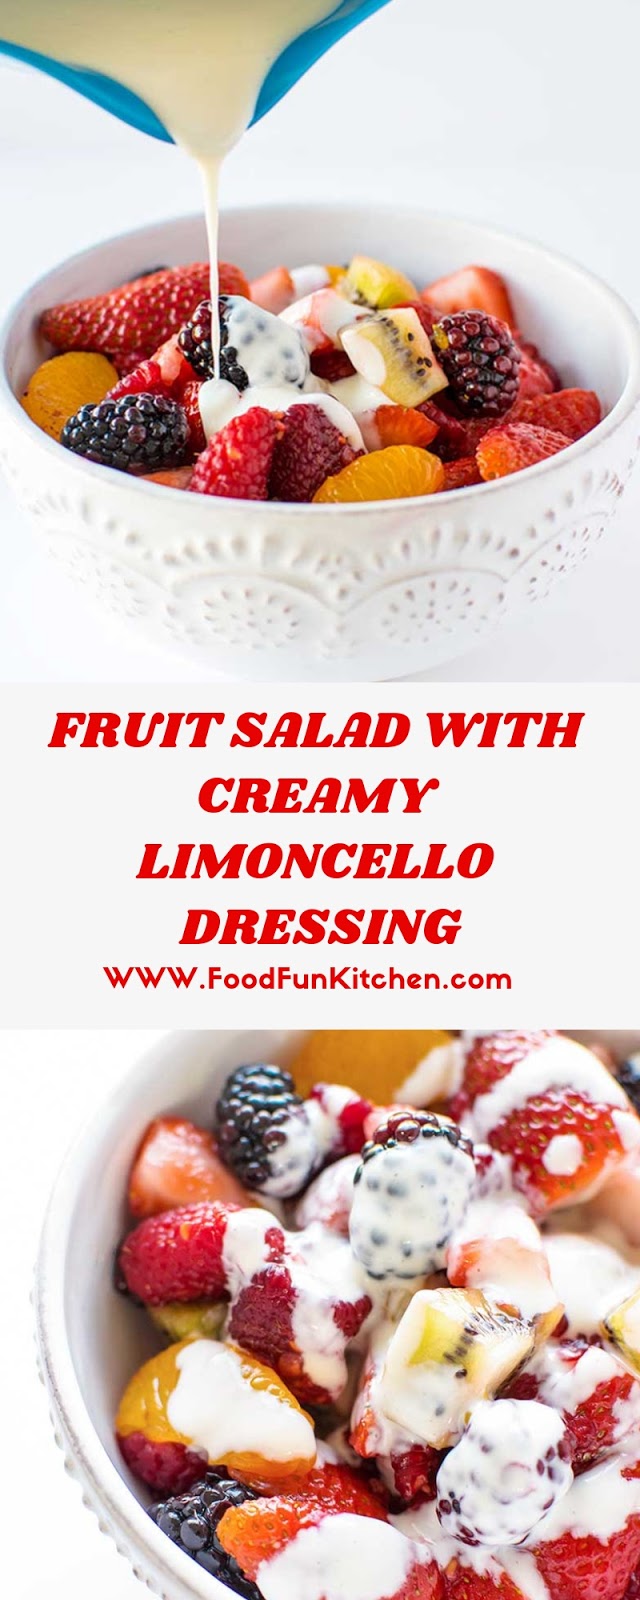 FRUIT SALAD WITH CREAMY LIMONCELLO DRESSING